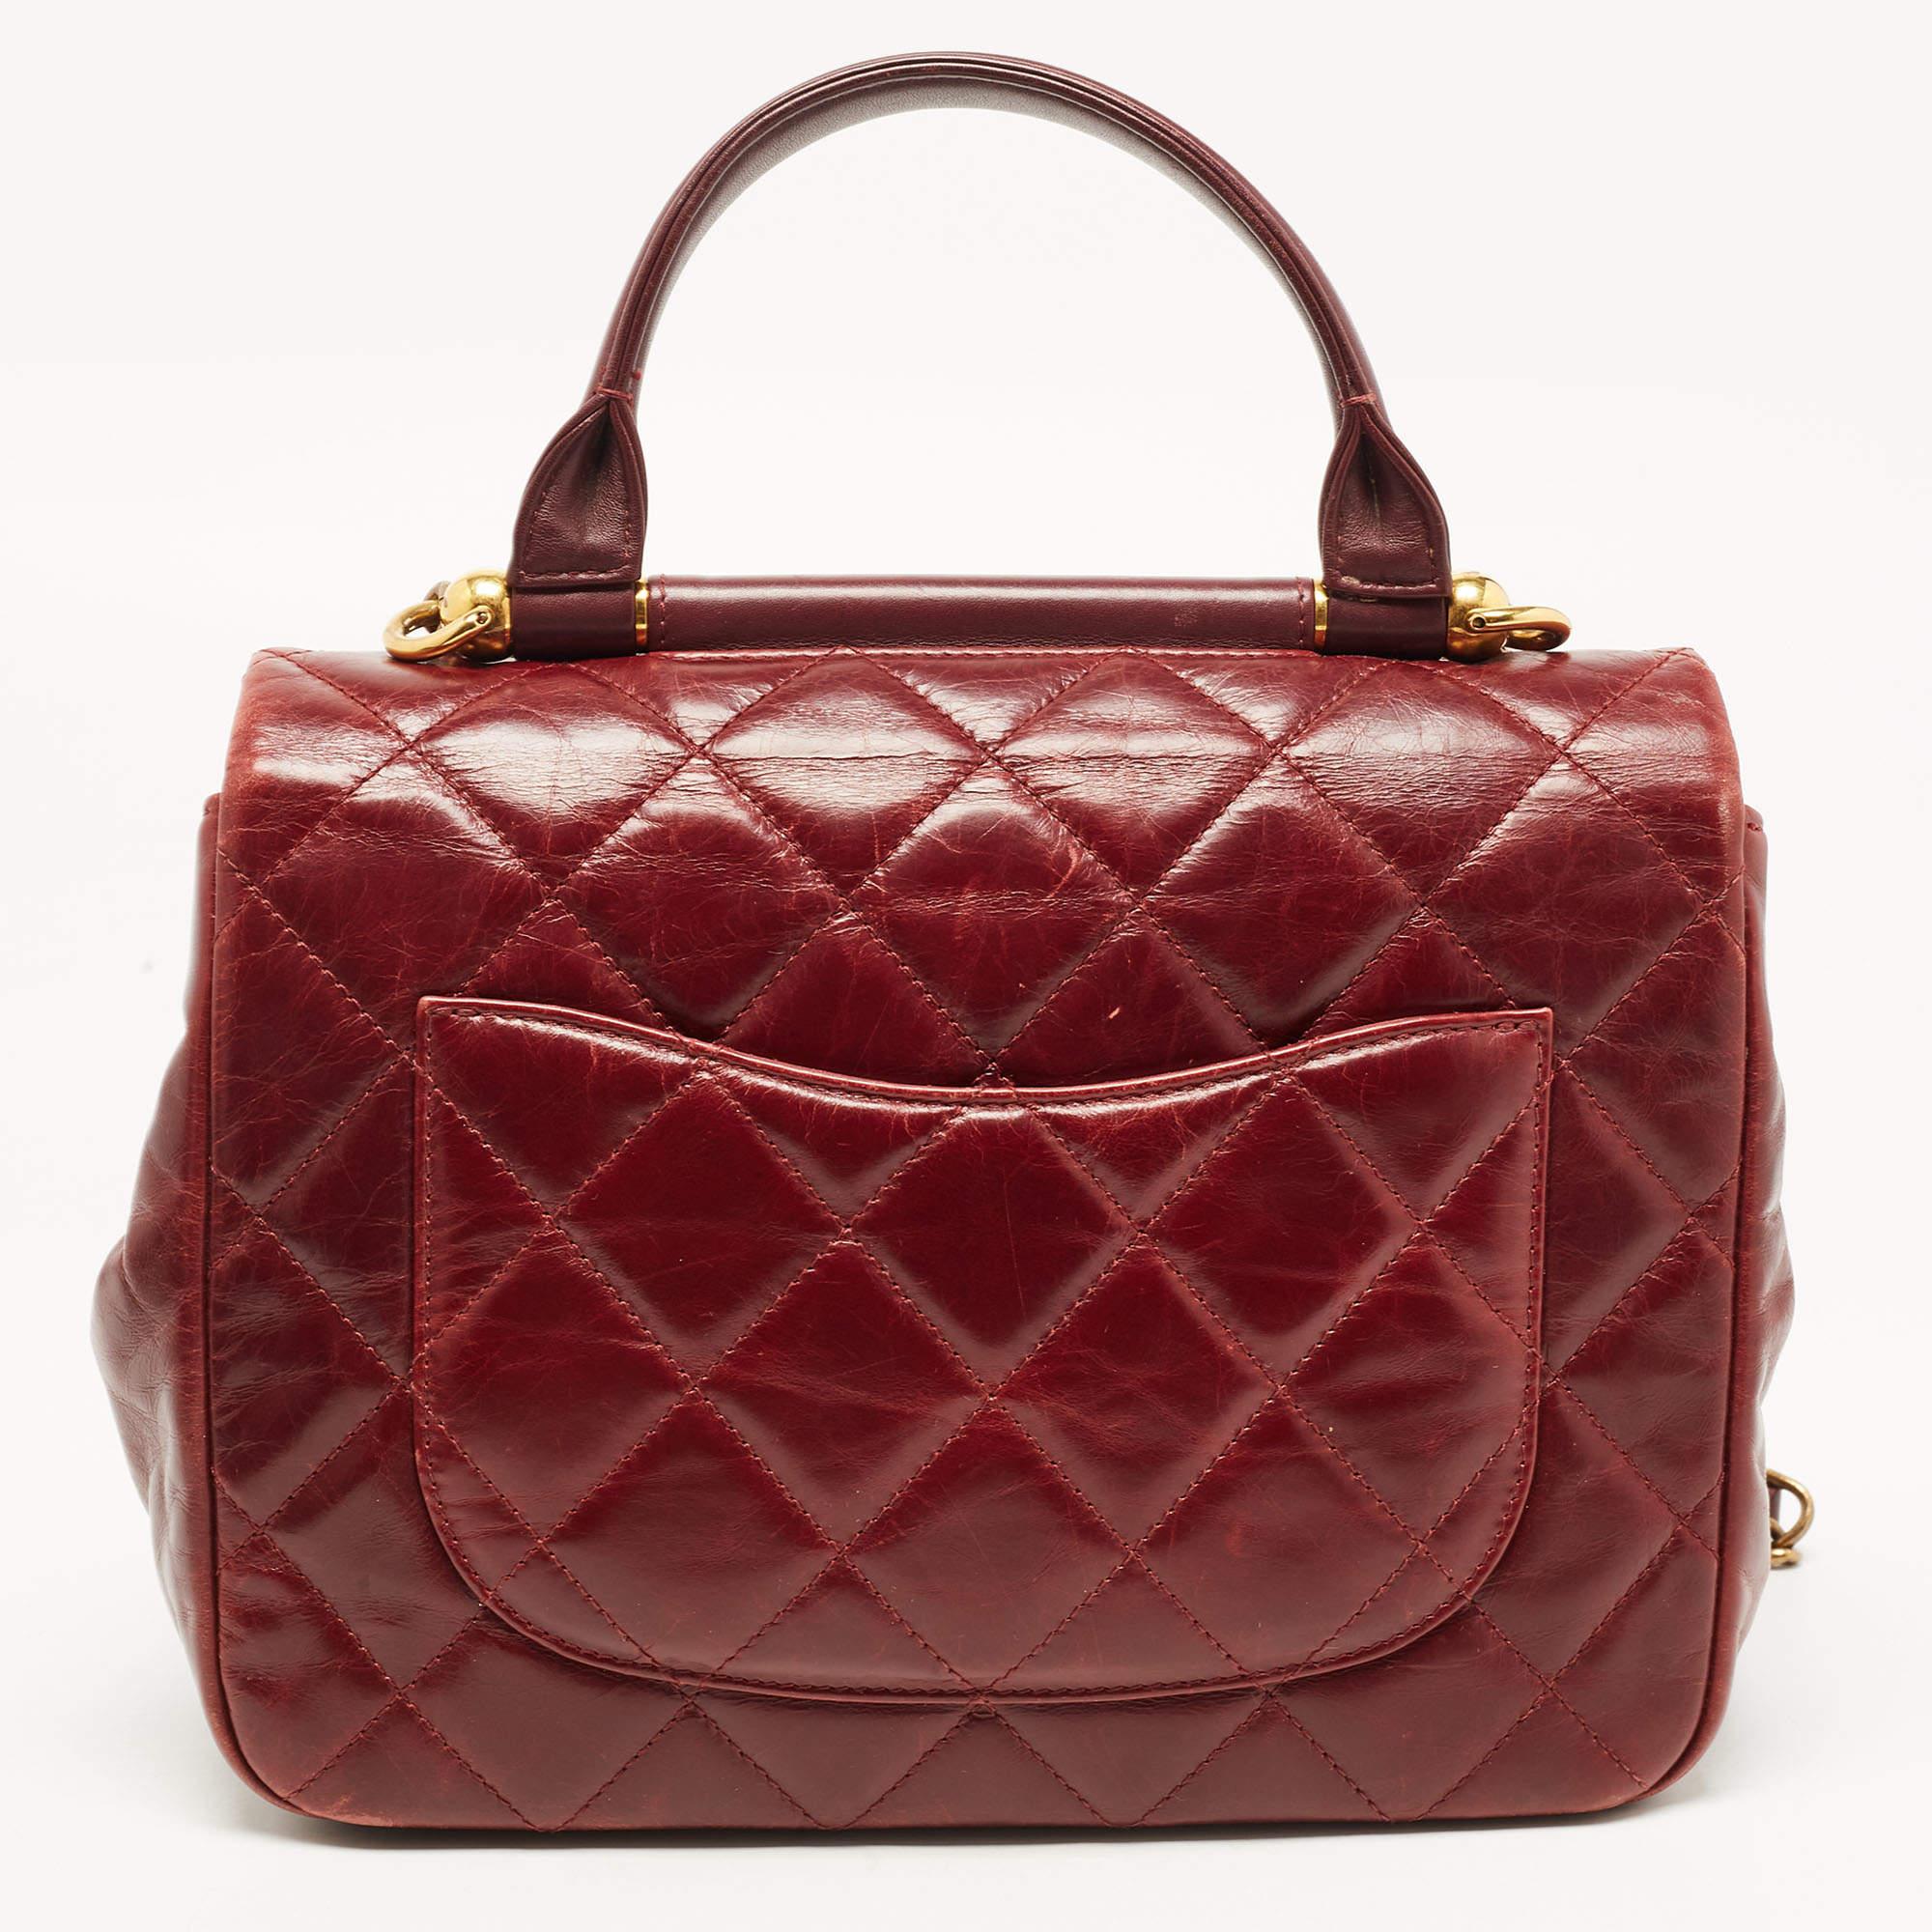 Chanel Burgundy Quilted Leather Gold Bar Top Handle Bag 6